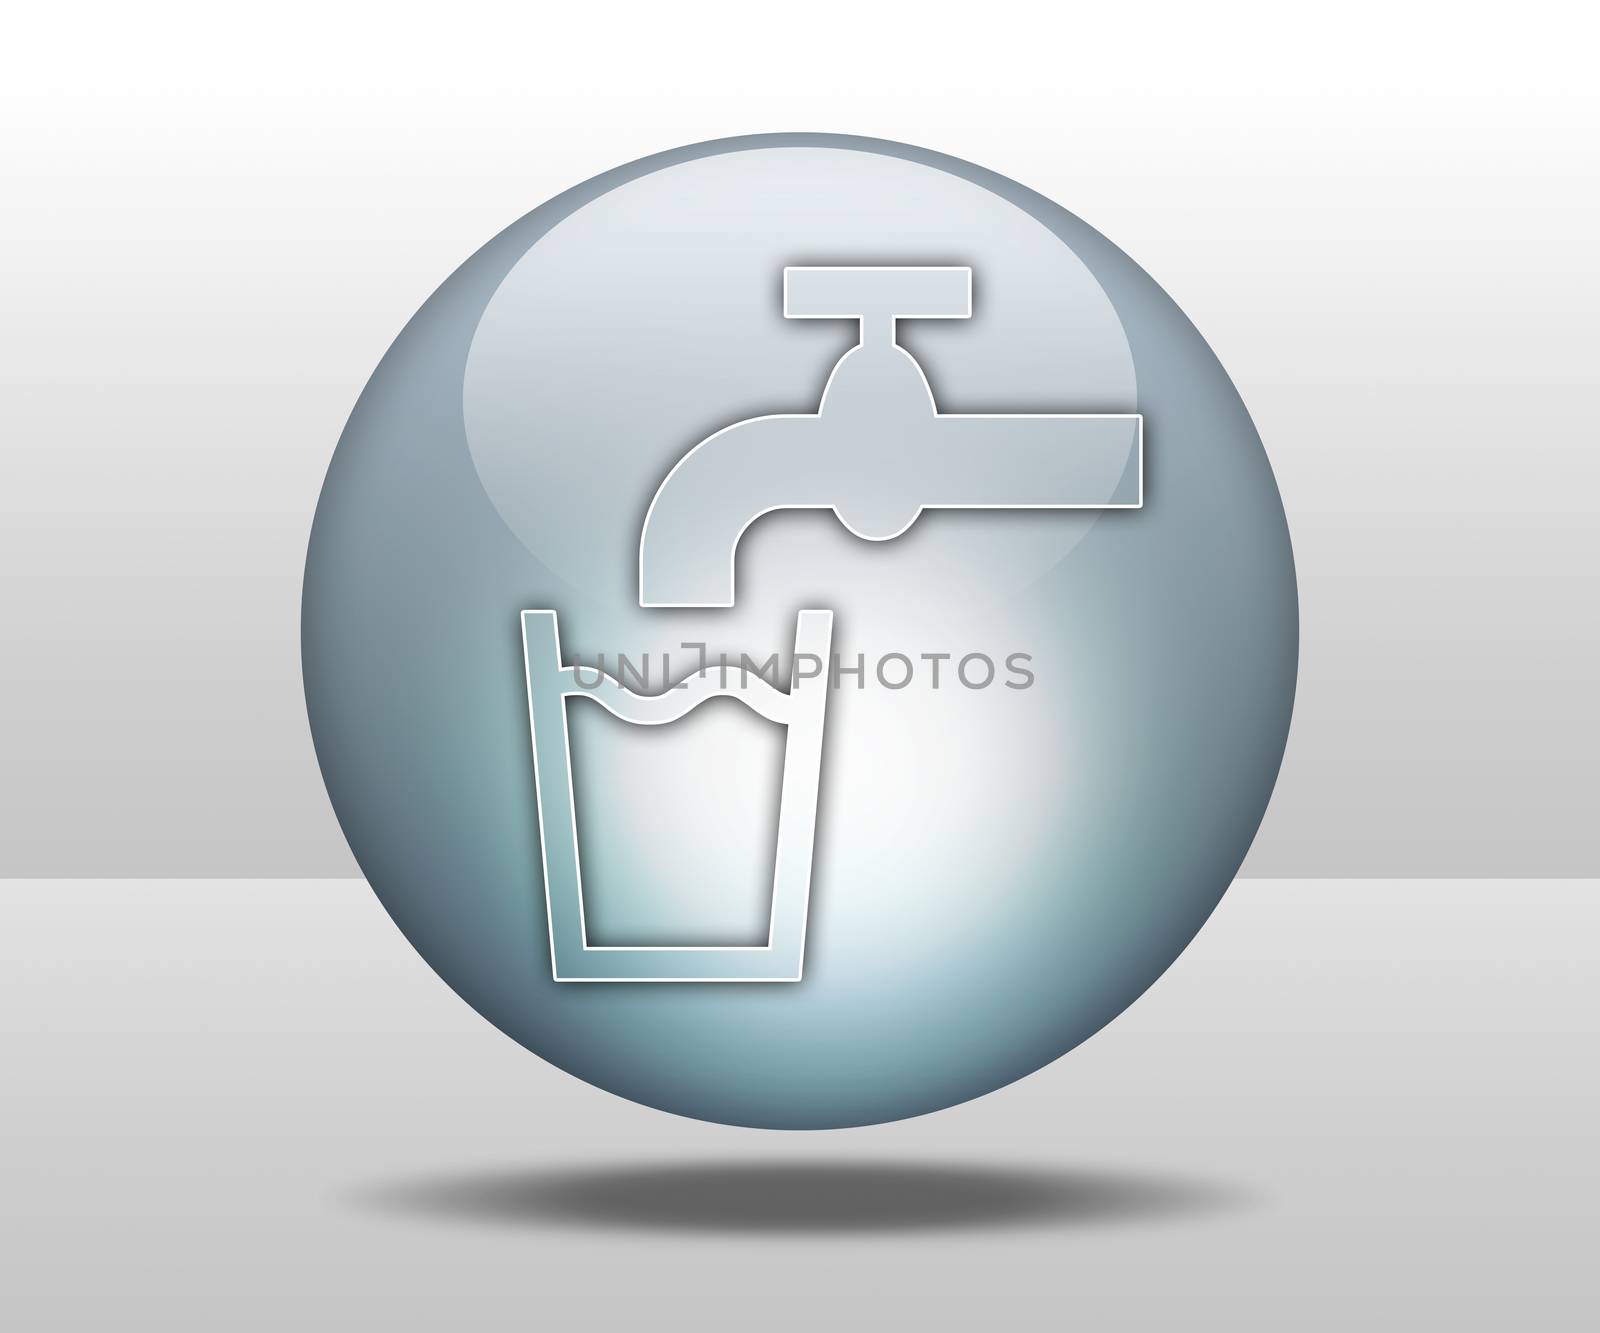 Icon, Button, Pictogram with Running Water symbol